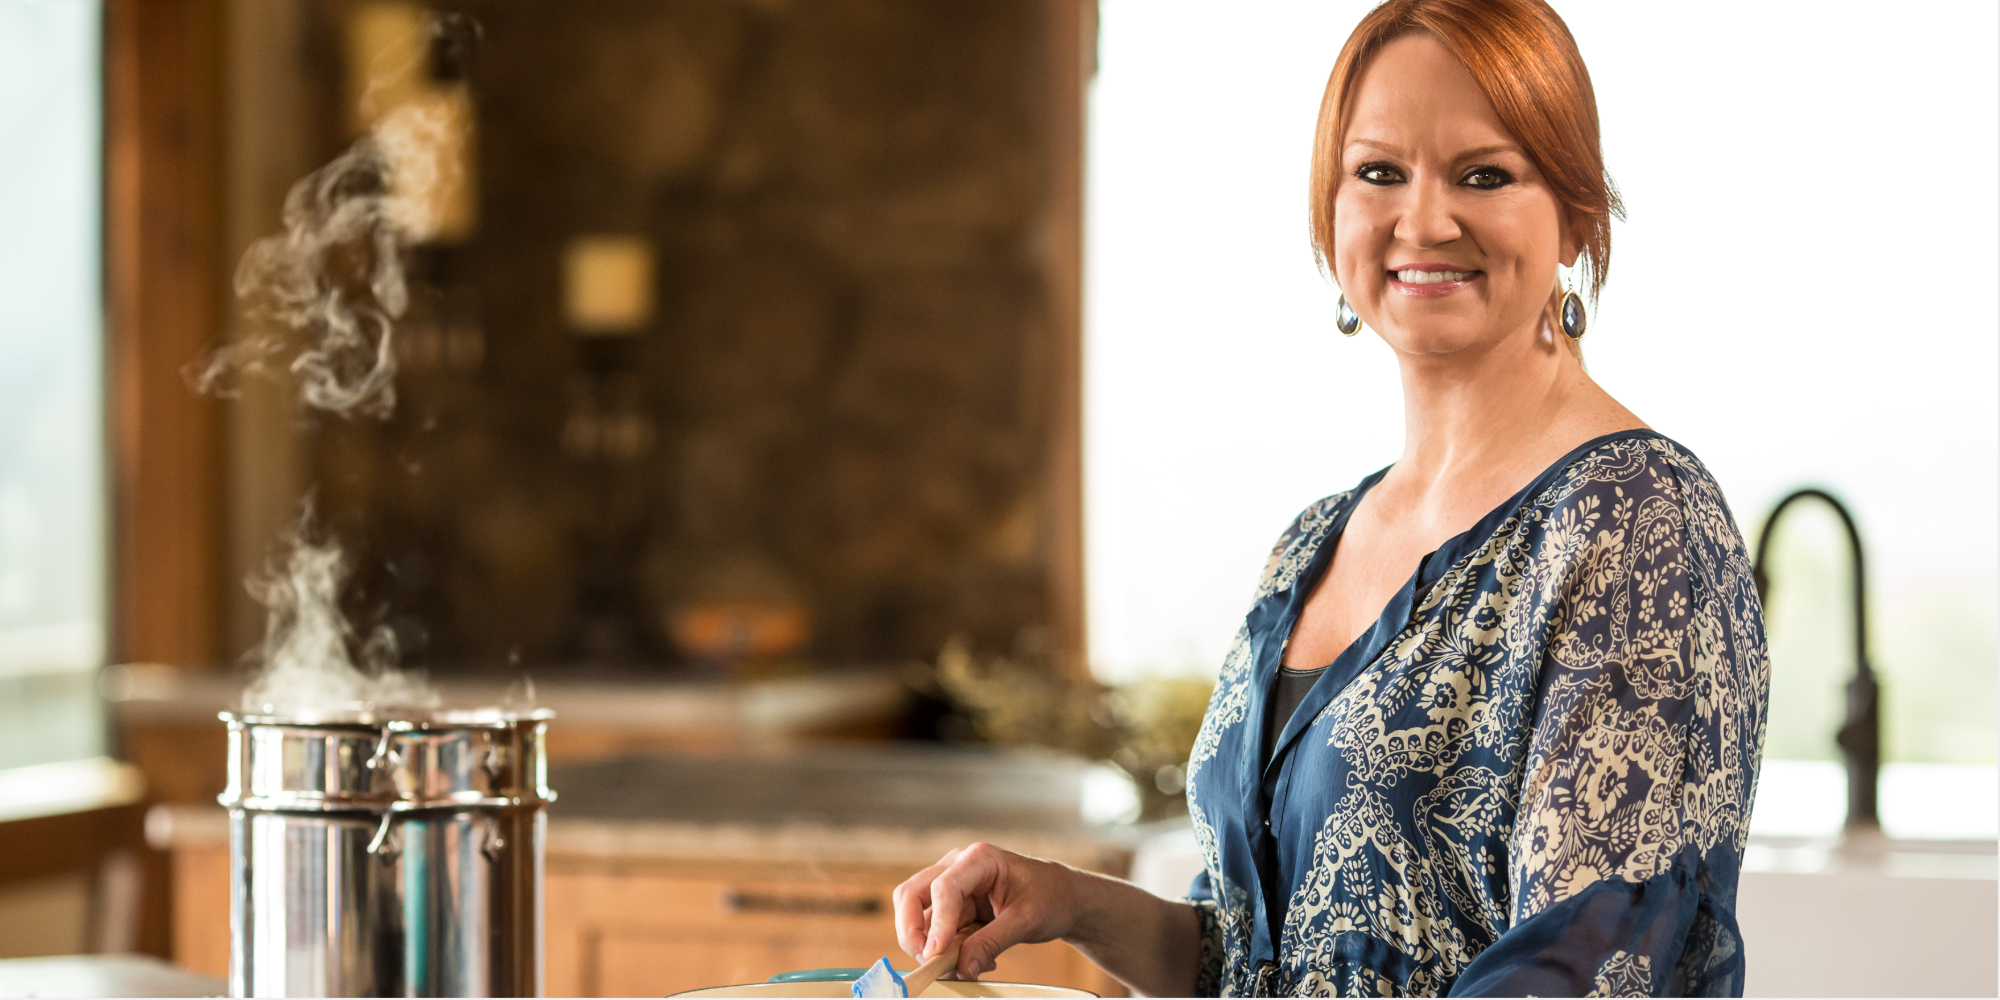 ree drummond wears a blue shirt and cooks on the set of 'The Pioneer Woman'